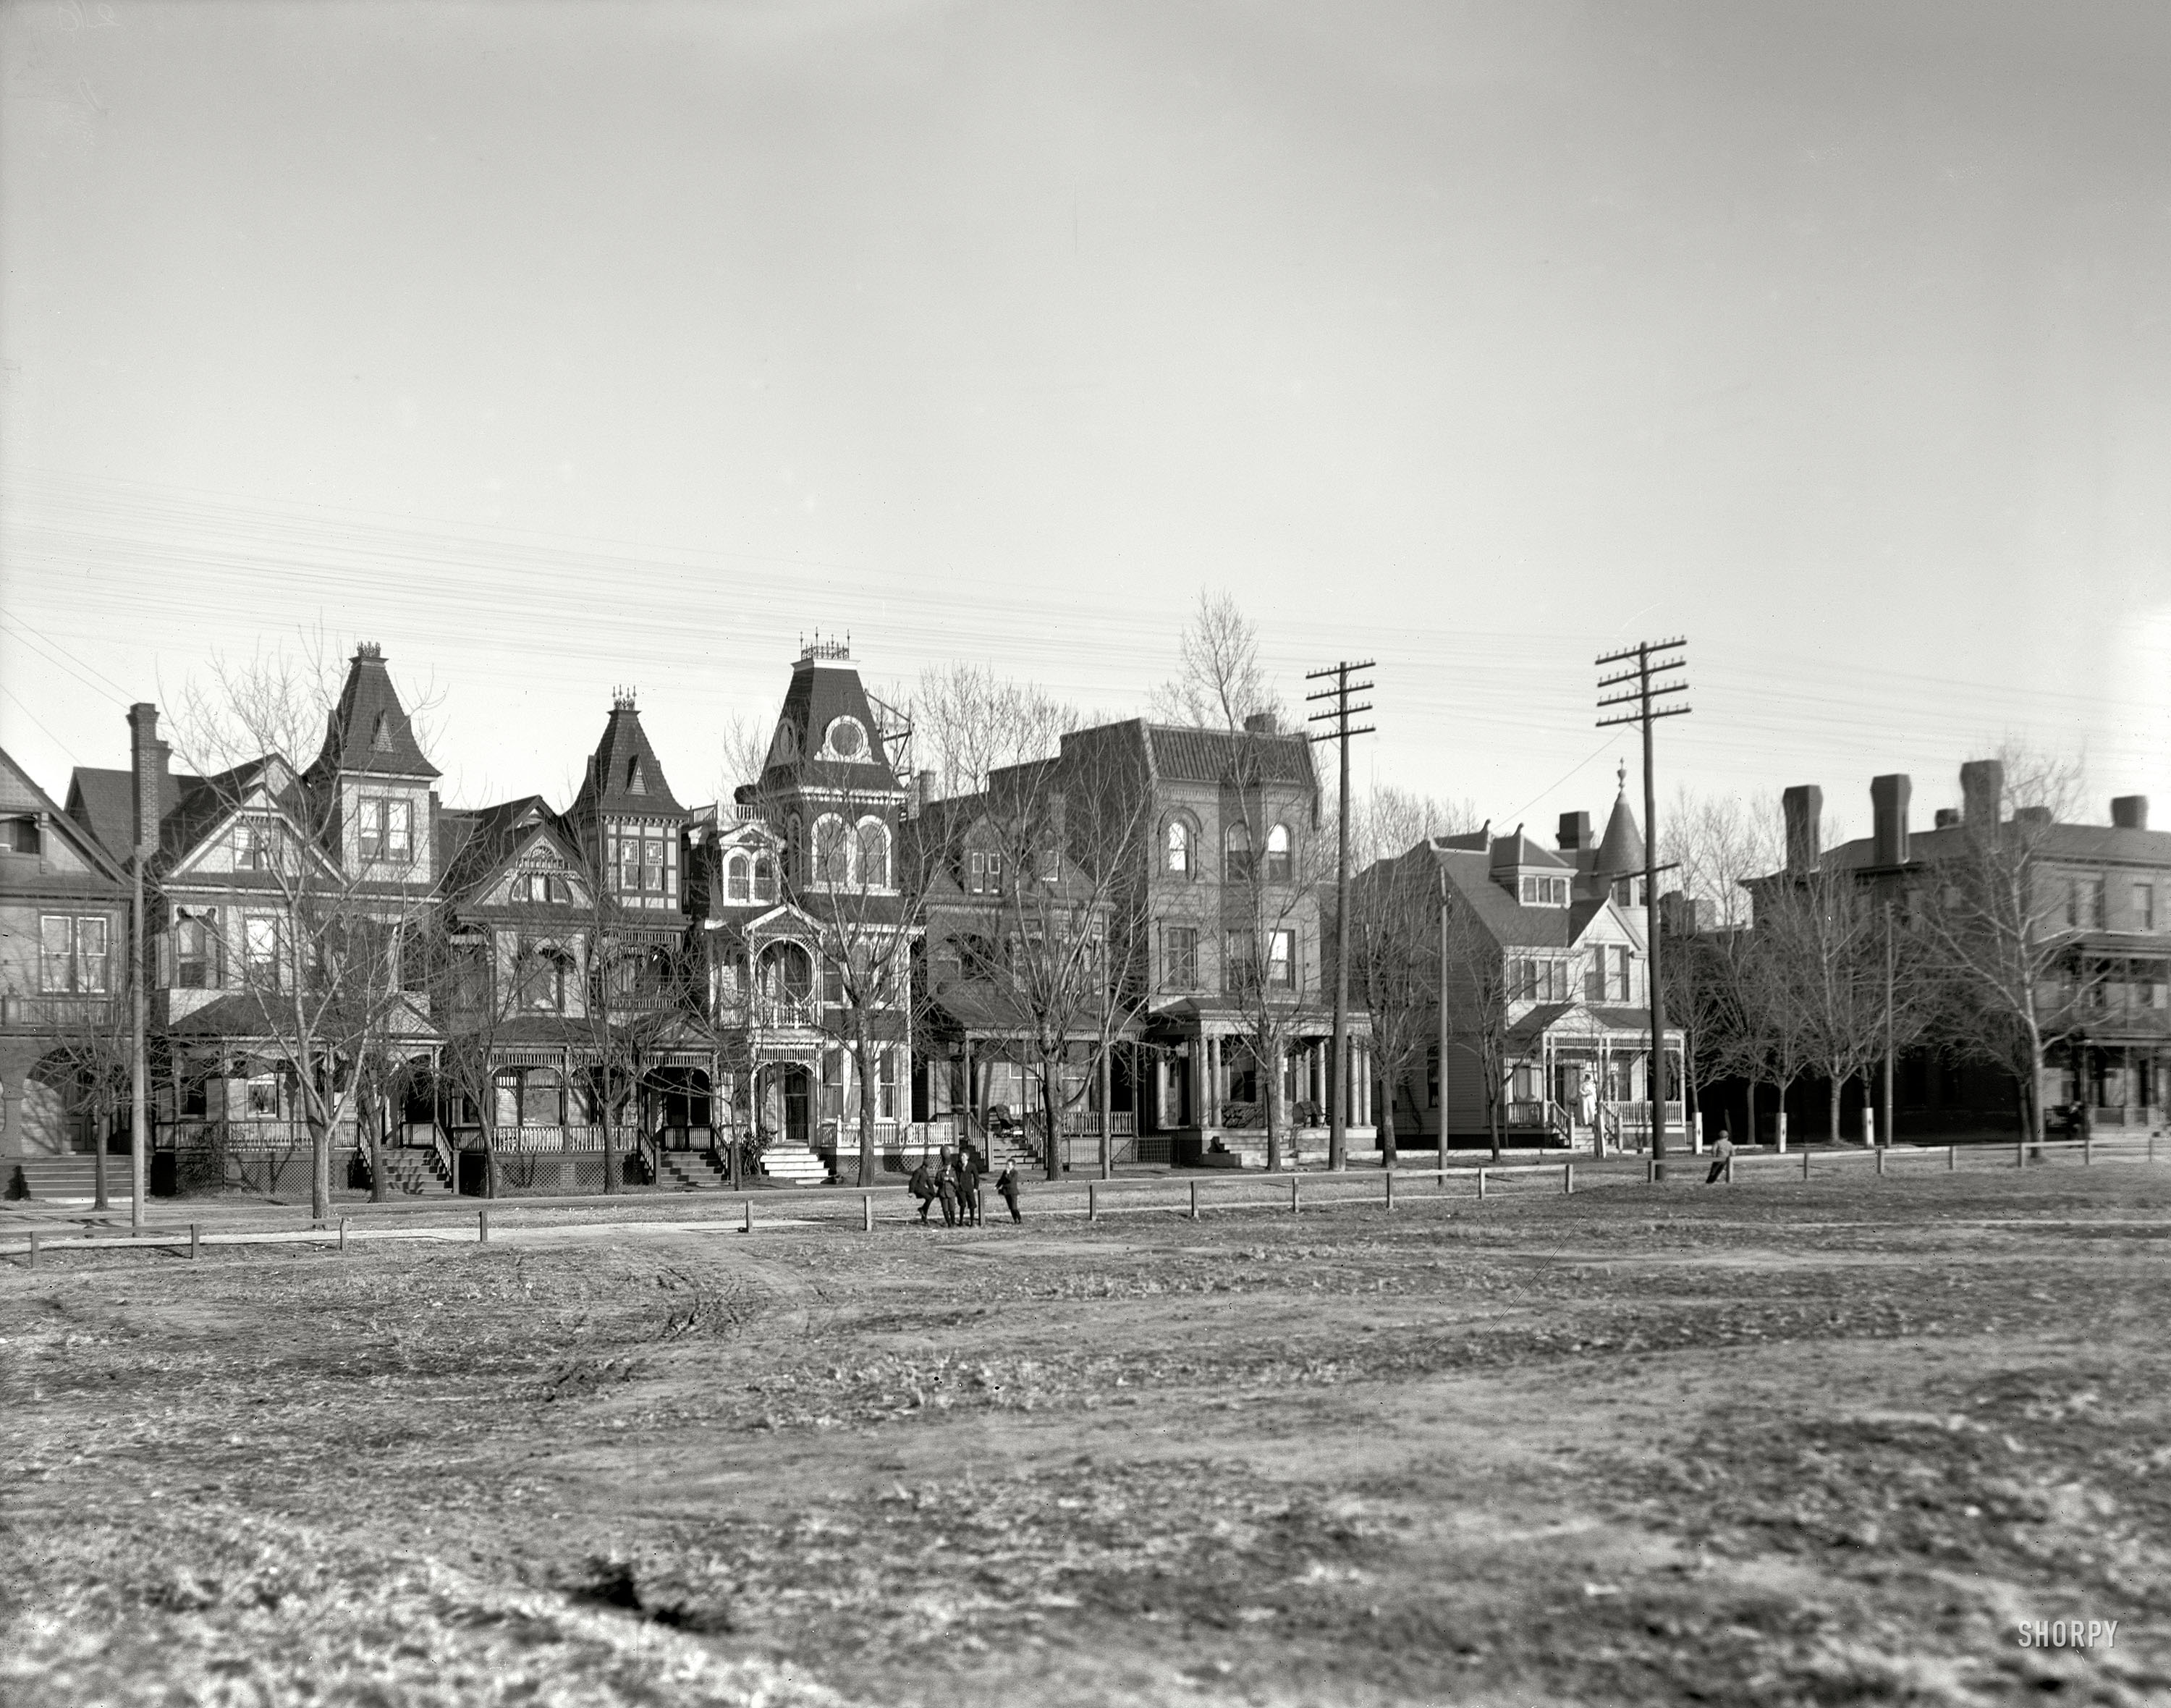 Newport News, Virginia, circa 1905. "West Avenue residences." 8x10 inch dry plate glass negative, Detroit Publishing Company. View full size.